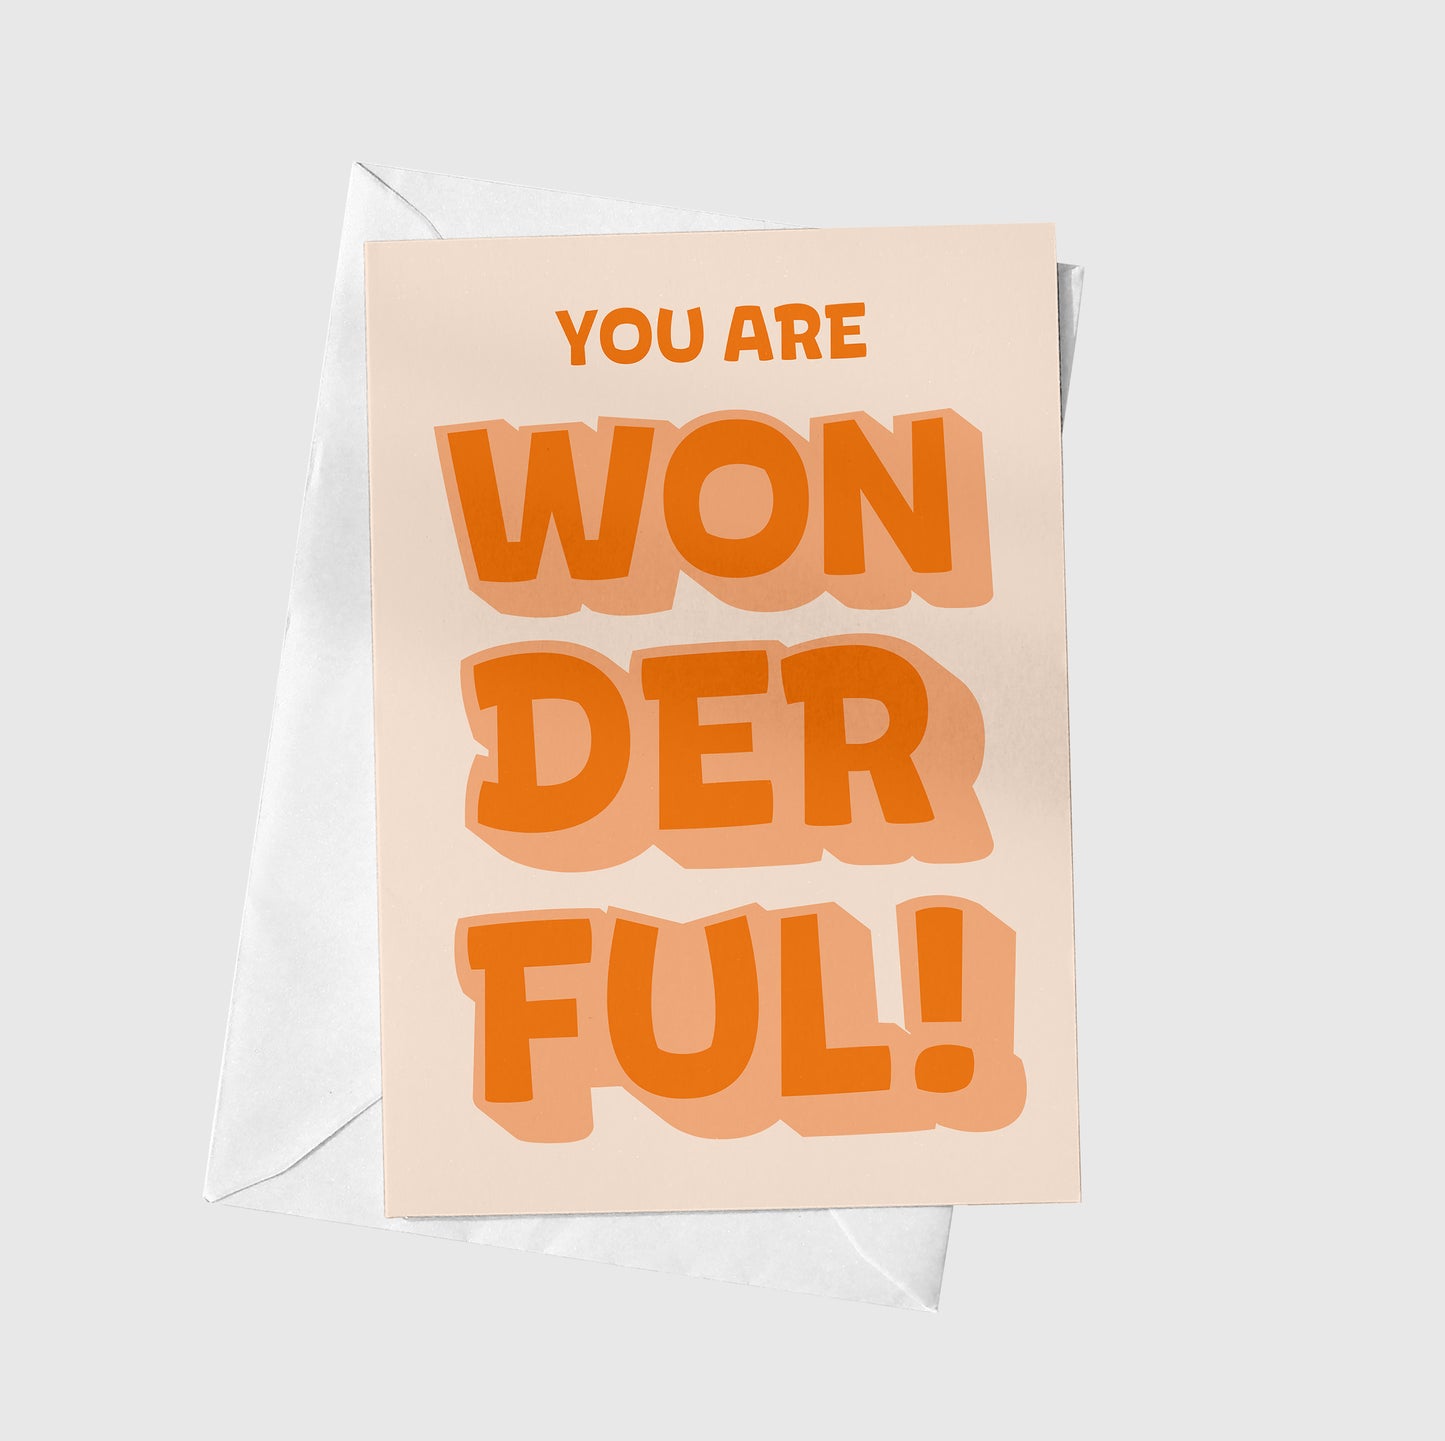 You Are Wonderful